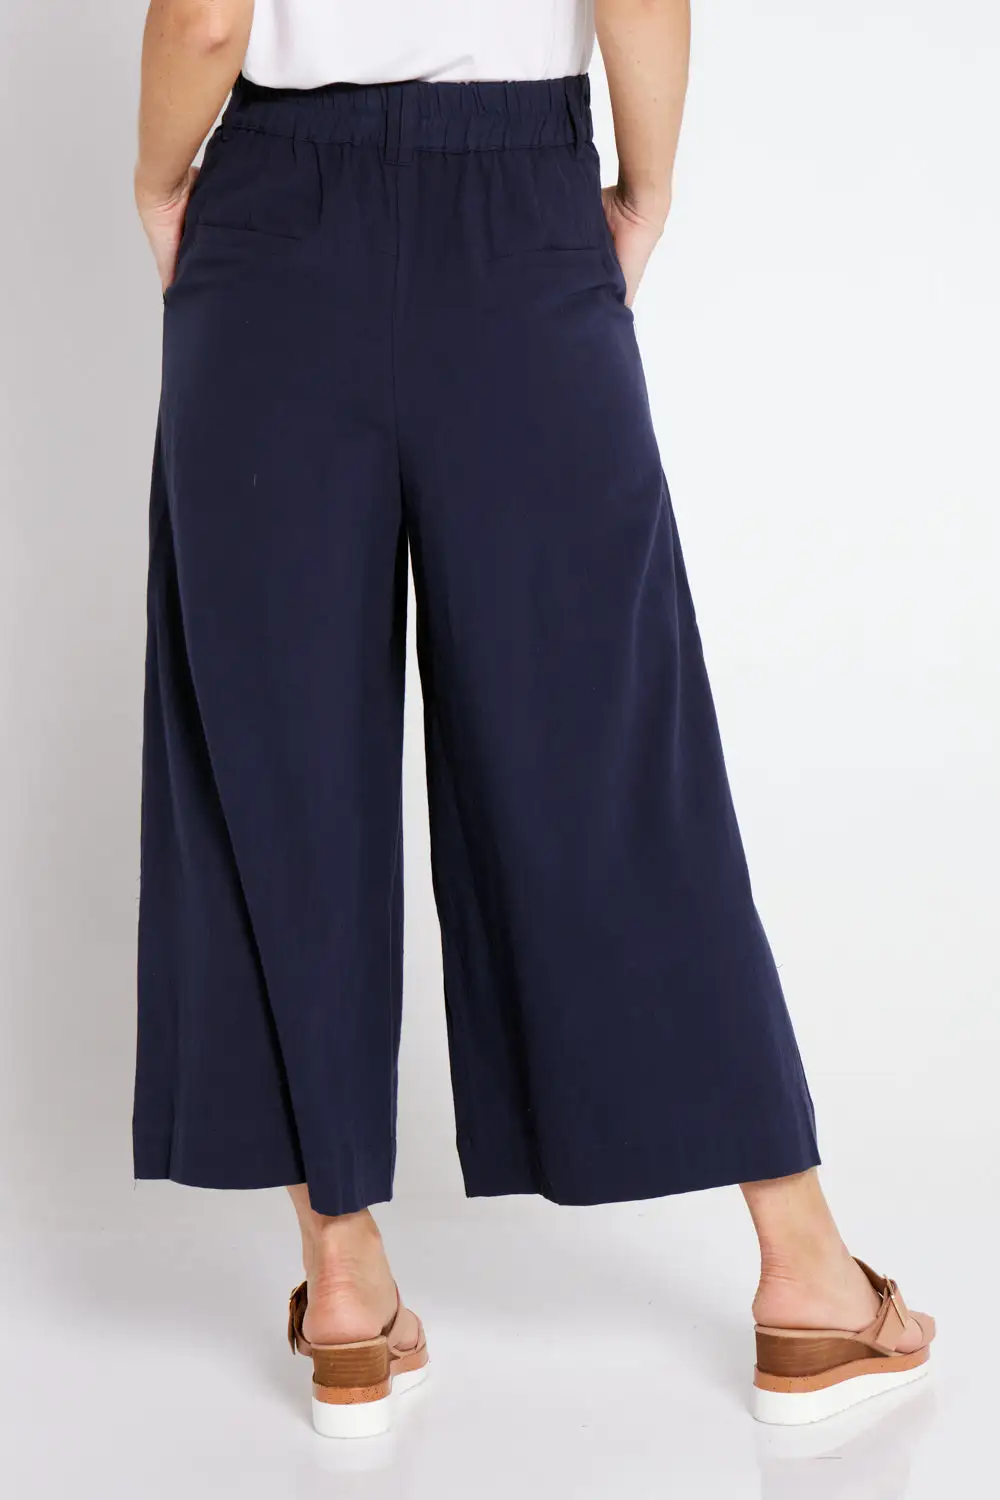 Jetta Upcycled Cotton Culottes - Navy